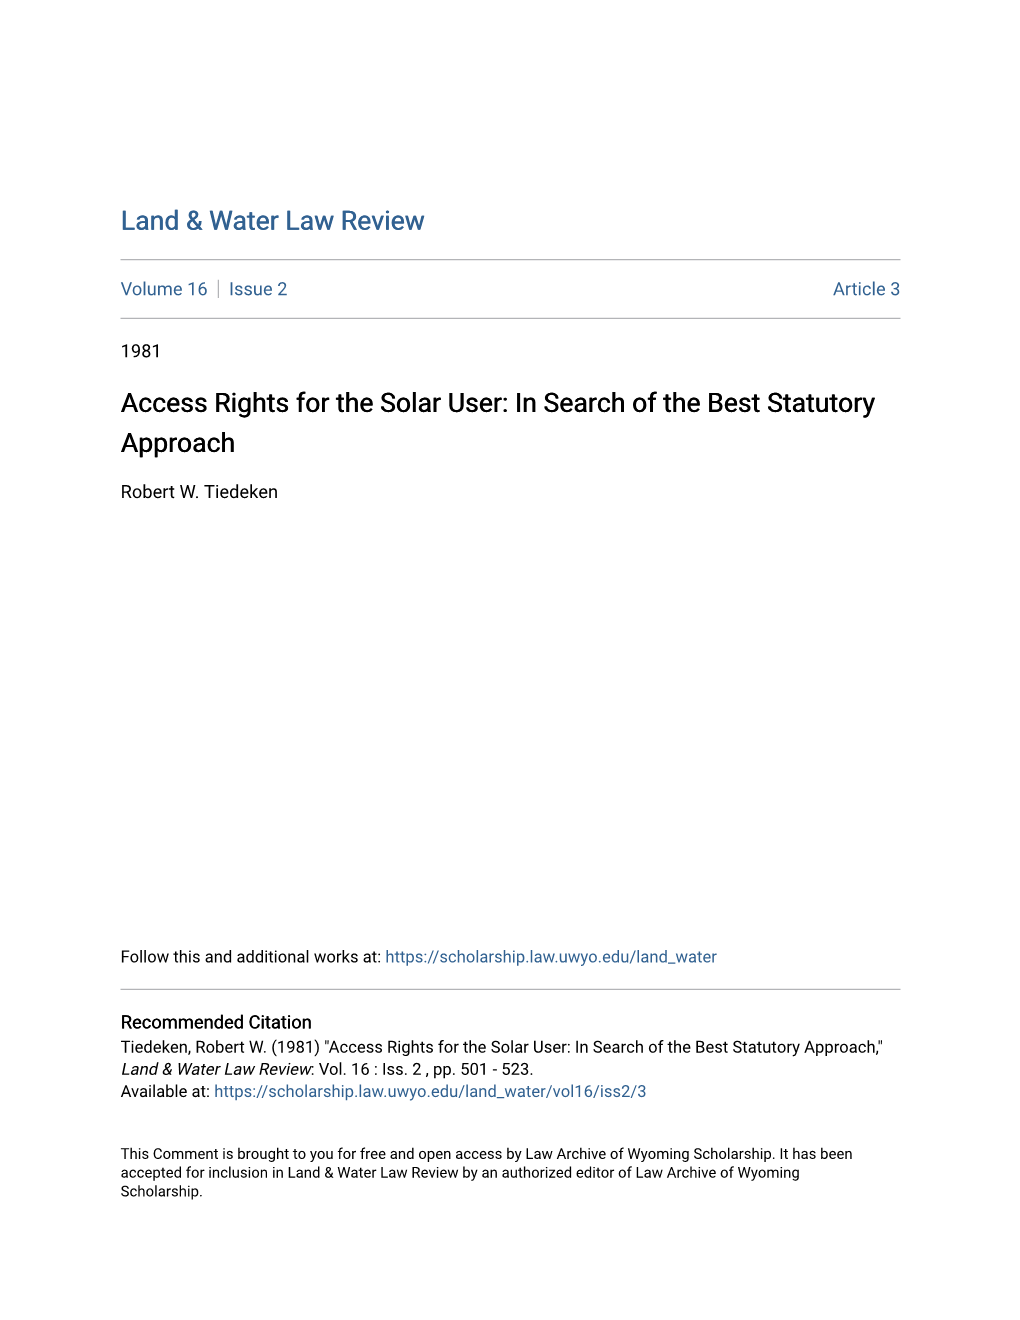 Access Rights for the Solar User: in Search of the Best Statutory Approach